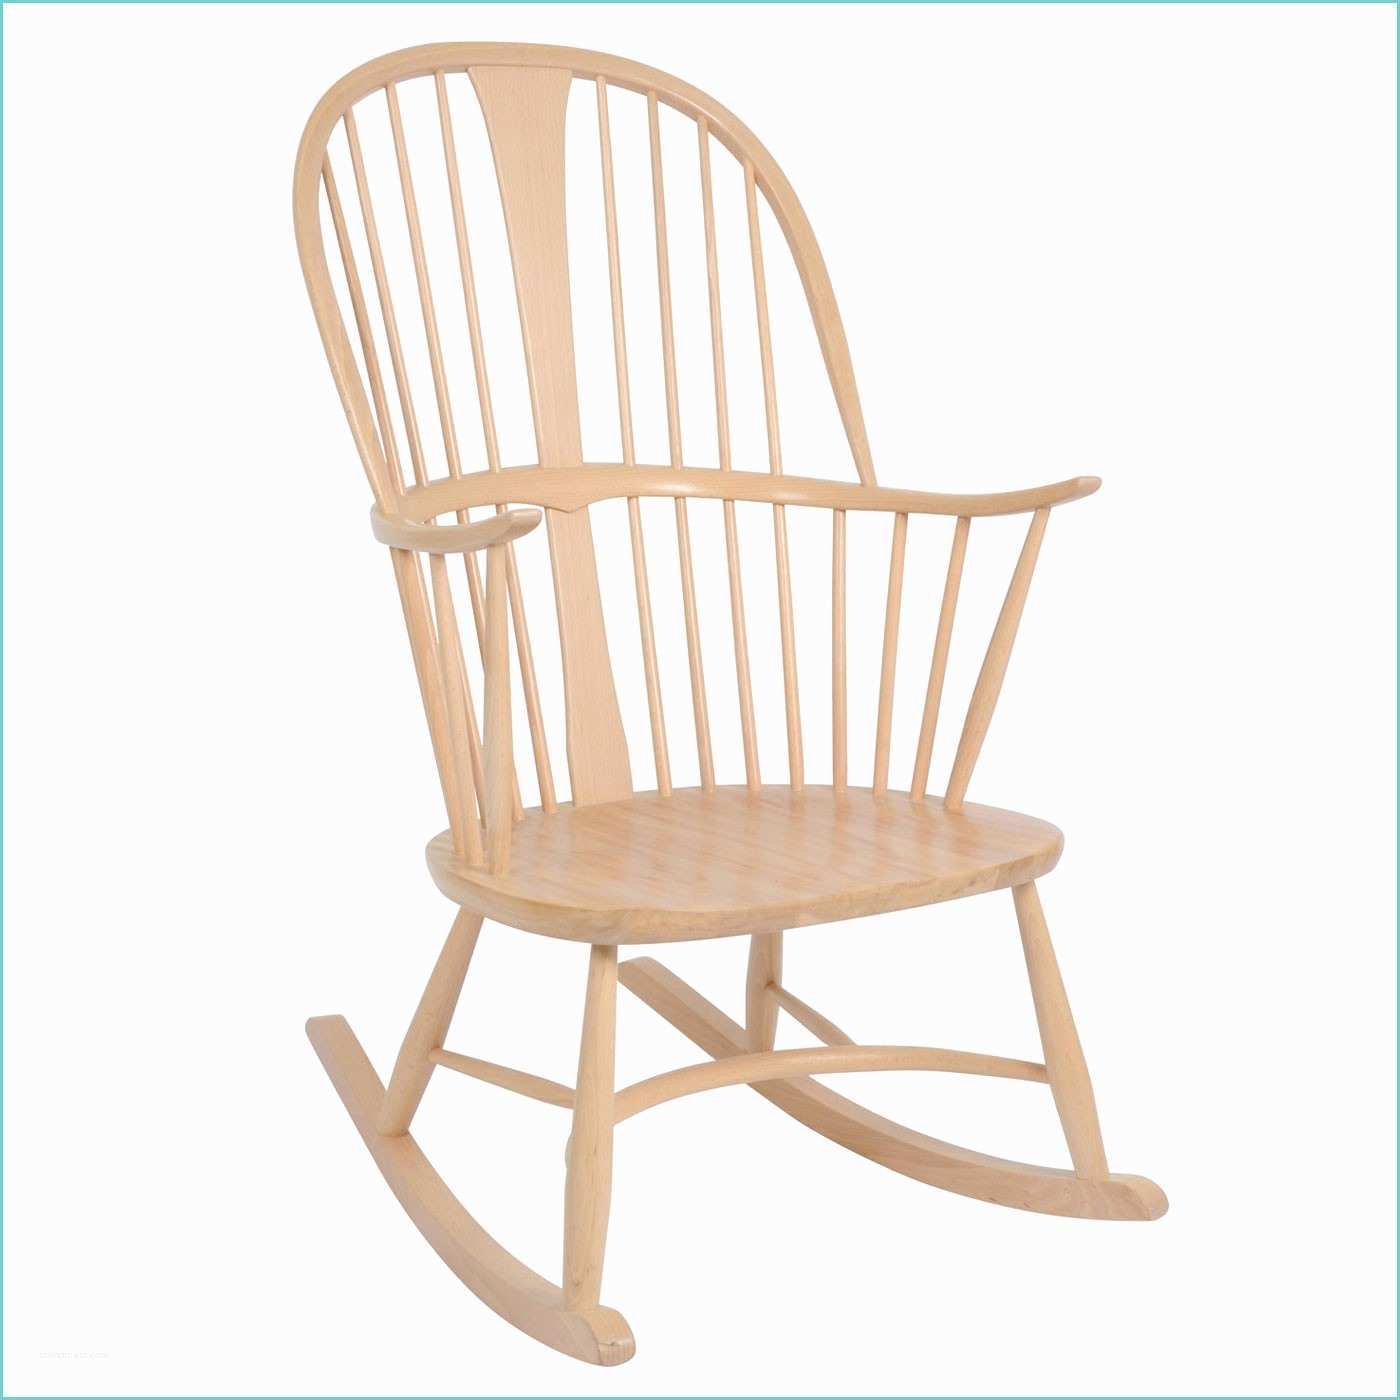 Originals Chairmakers Rocking Chair Ercol originals Chairmakers Rocking Chair